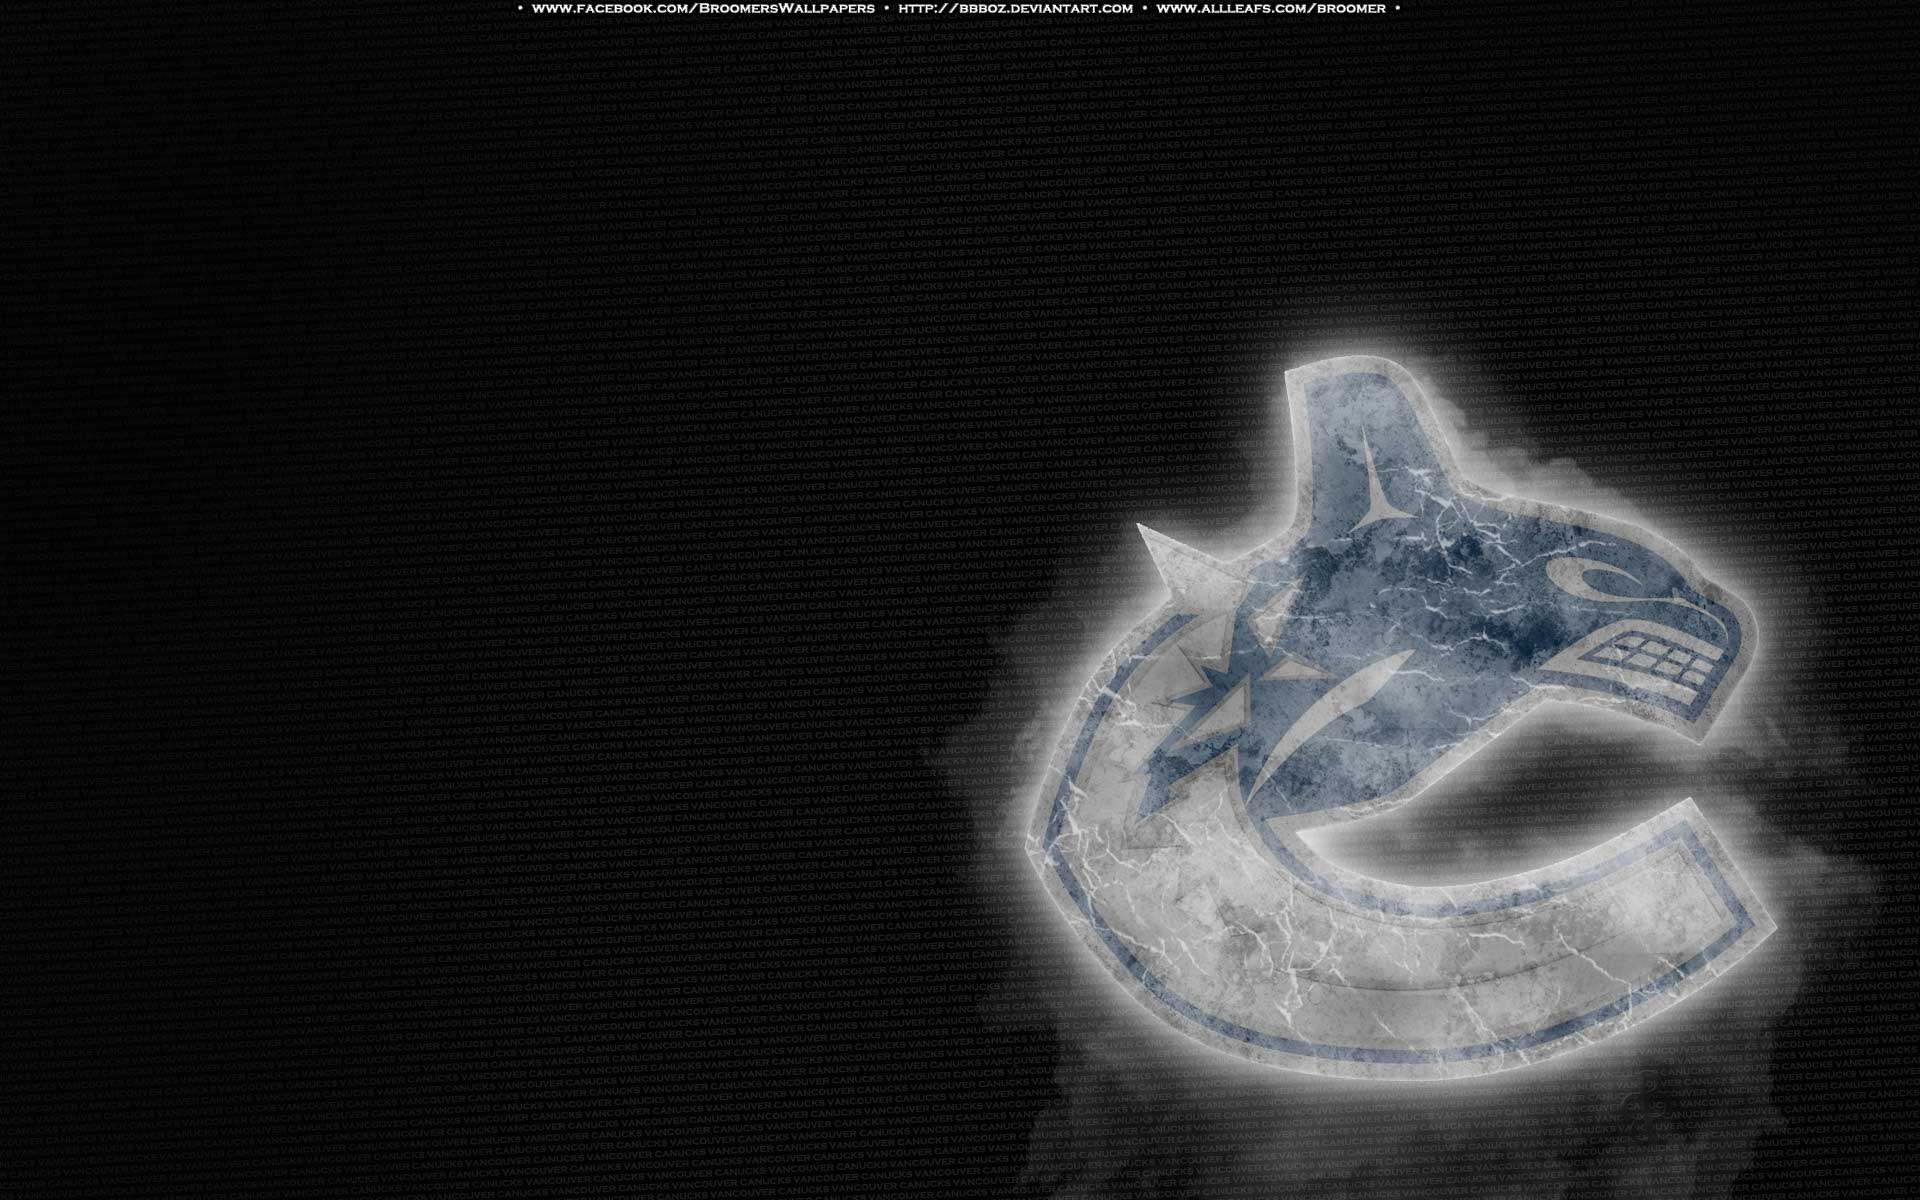 Hd Wallpapers Canucks Backgrounds Wallpapers 1920 X 1200 427 Kb Jpeg